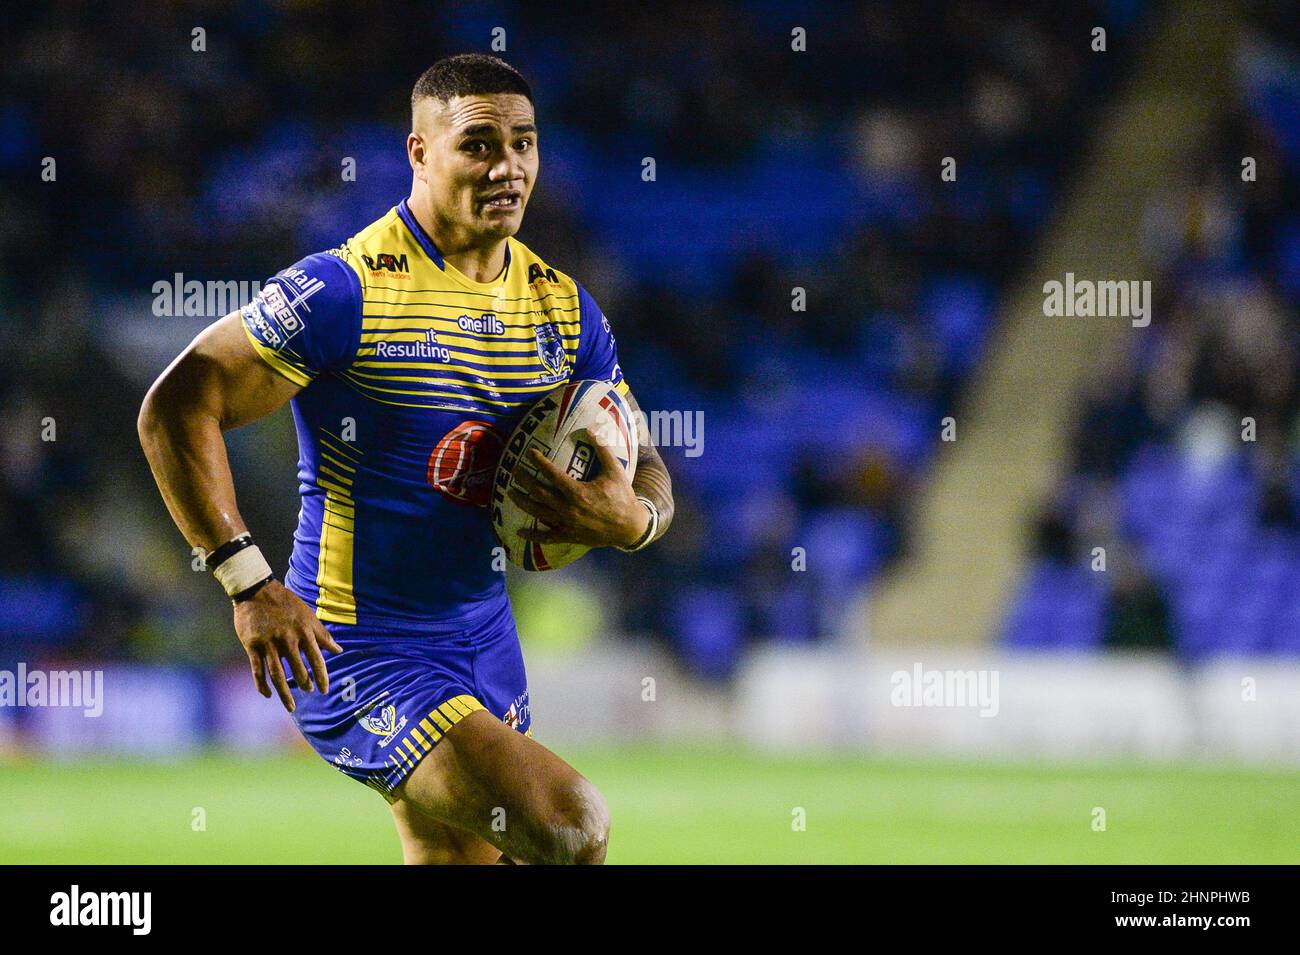 Warrington, England - 17 February 2022 - Former Castleford Tigers player Peter Mata'utia of Warrington Wolves in action during the Rugby League Betfred Super League Round 2 Warrington Wolves vs Castleford Tigers at Halliwell Jones Stadium, Warrington, UK  Dean Williams Stock Photo